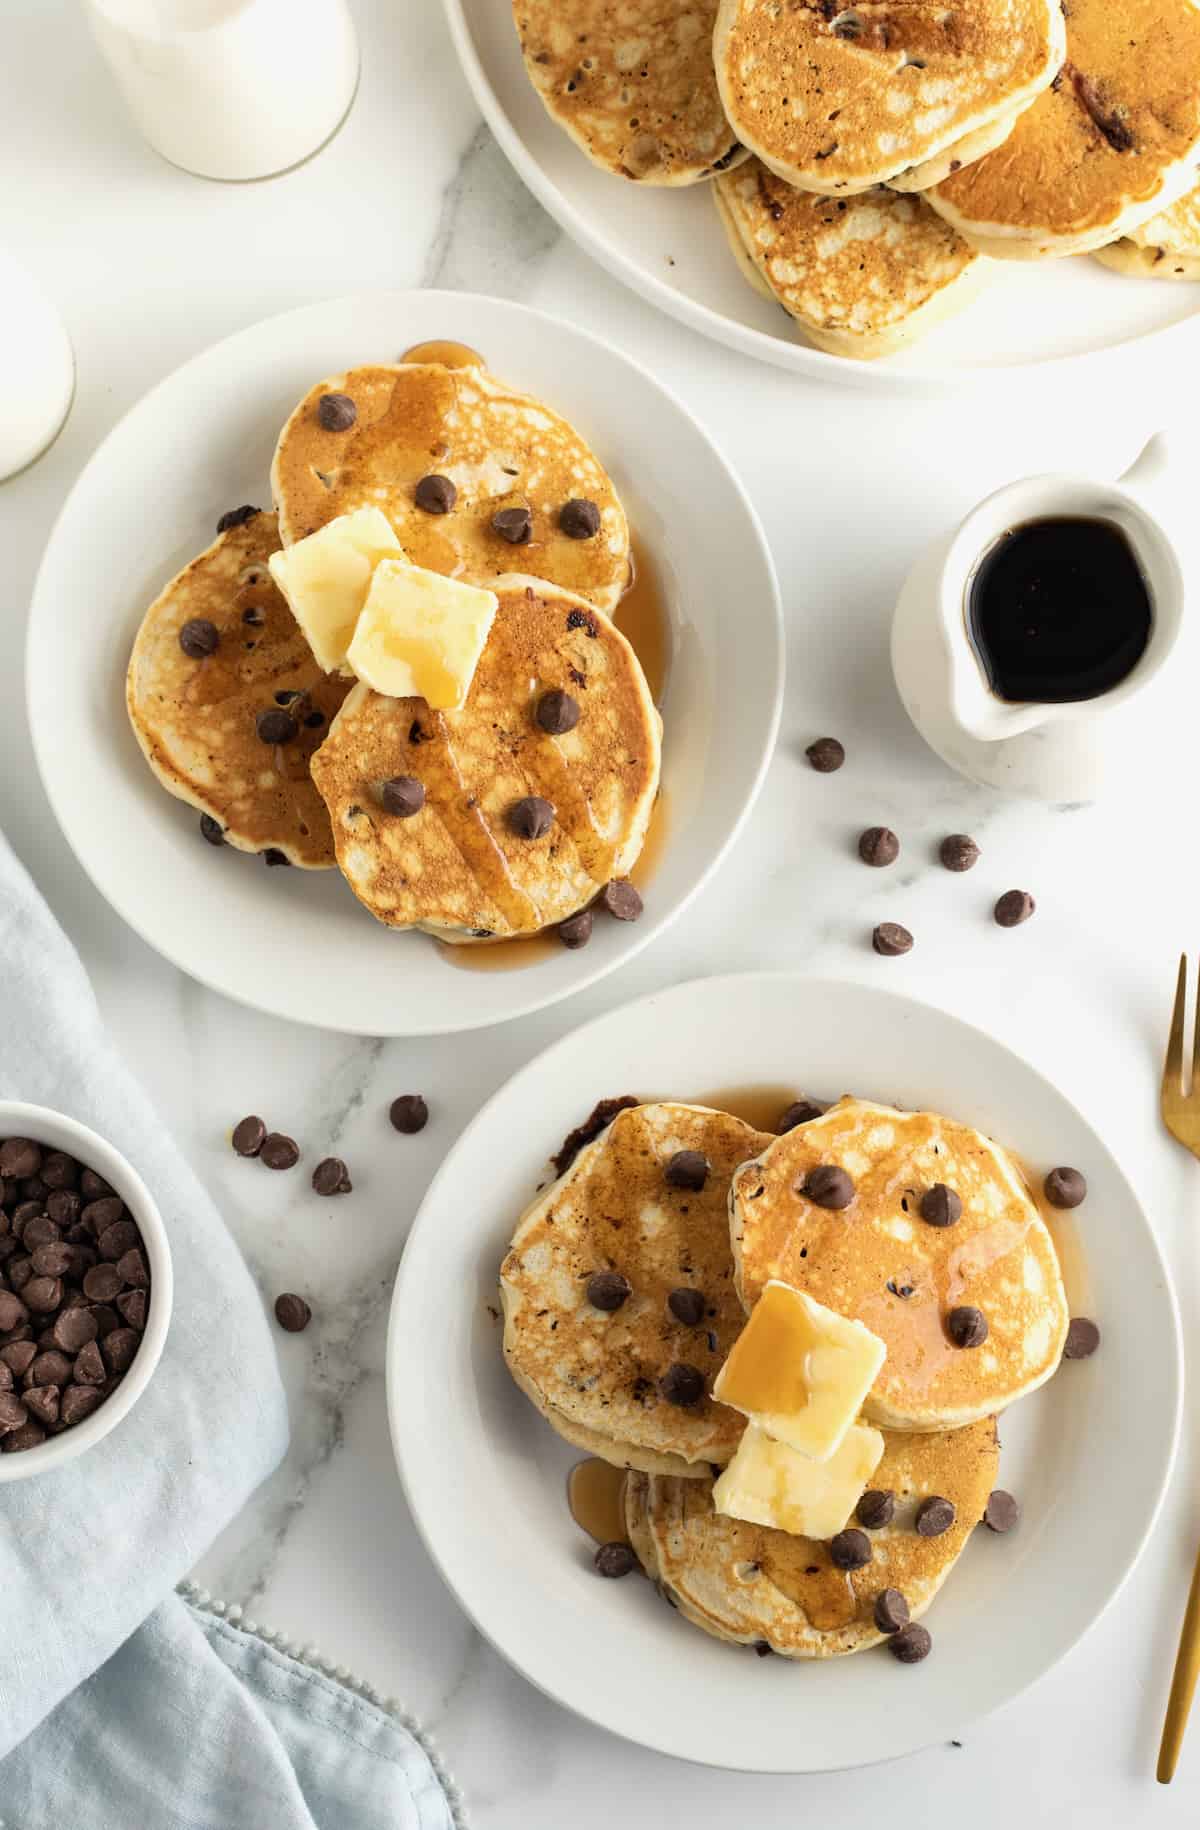 Chocolate Chip Pancakes from The Baker Mama